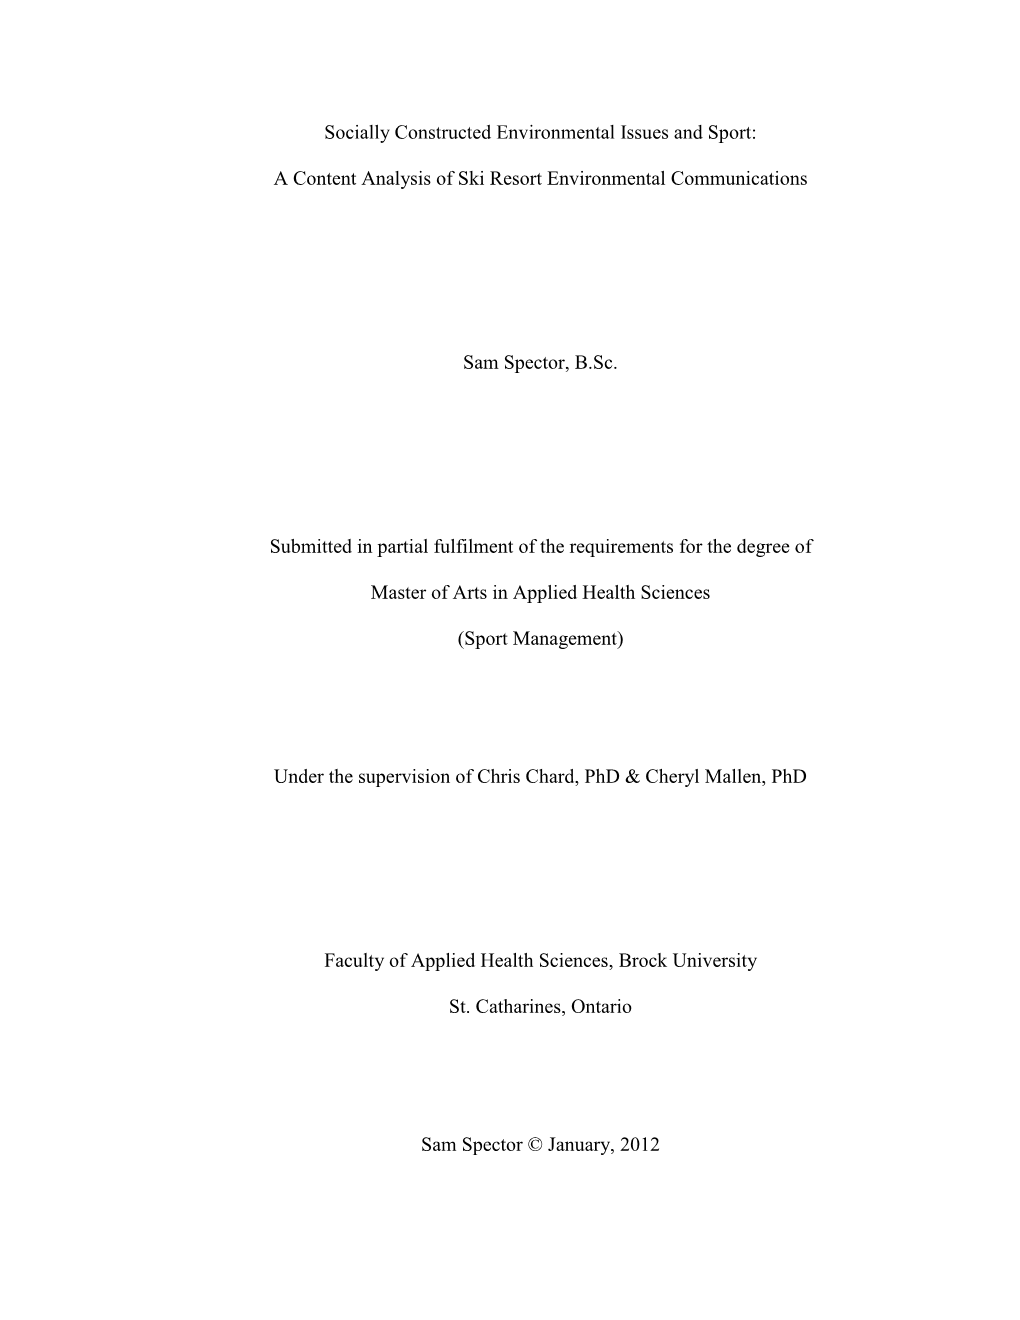 Socially Constructed Environmental Issues and Sport: a Content Analysis of Ski Resort Environmental Communications Sam Spector